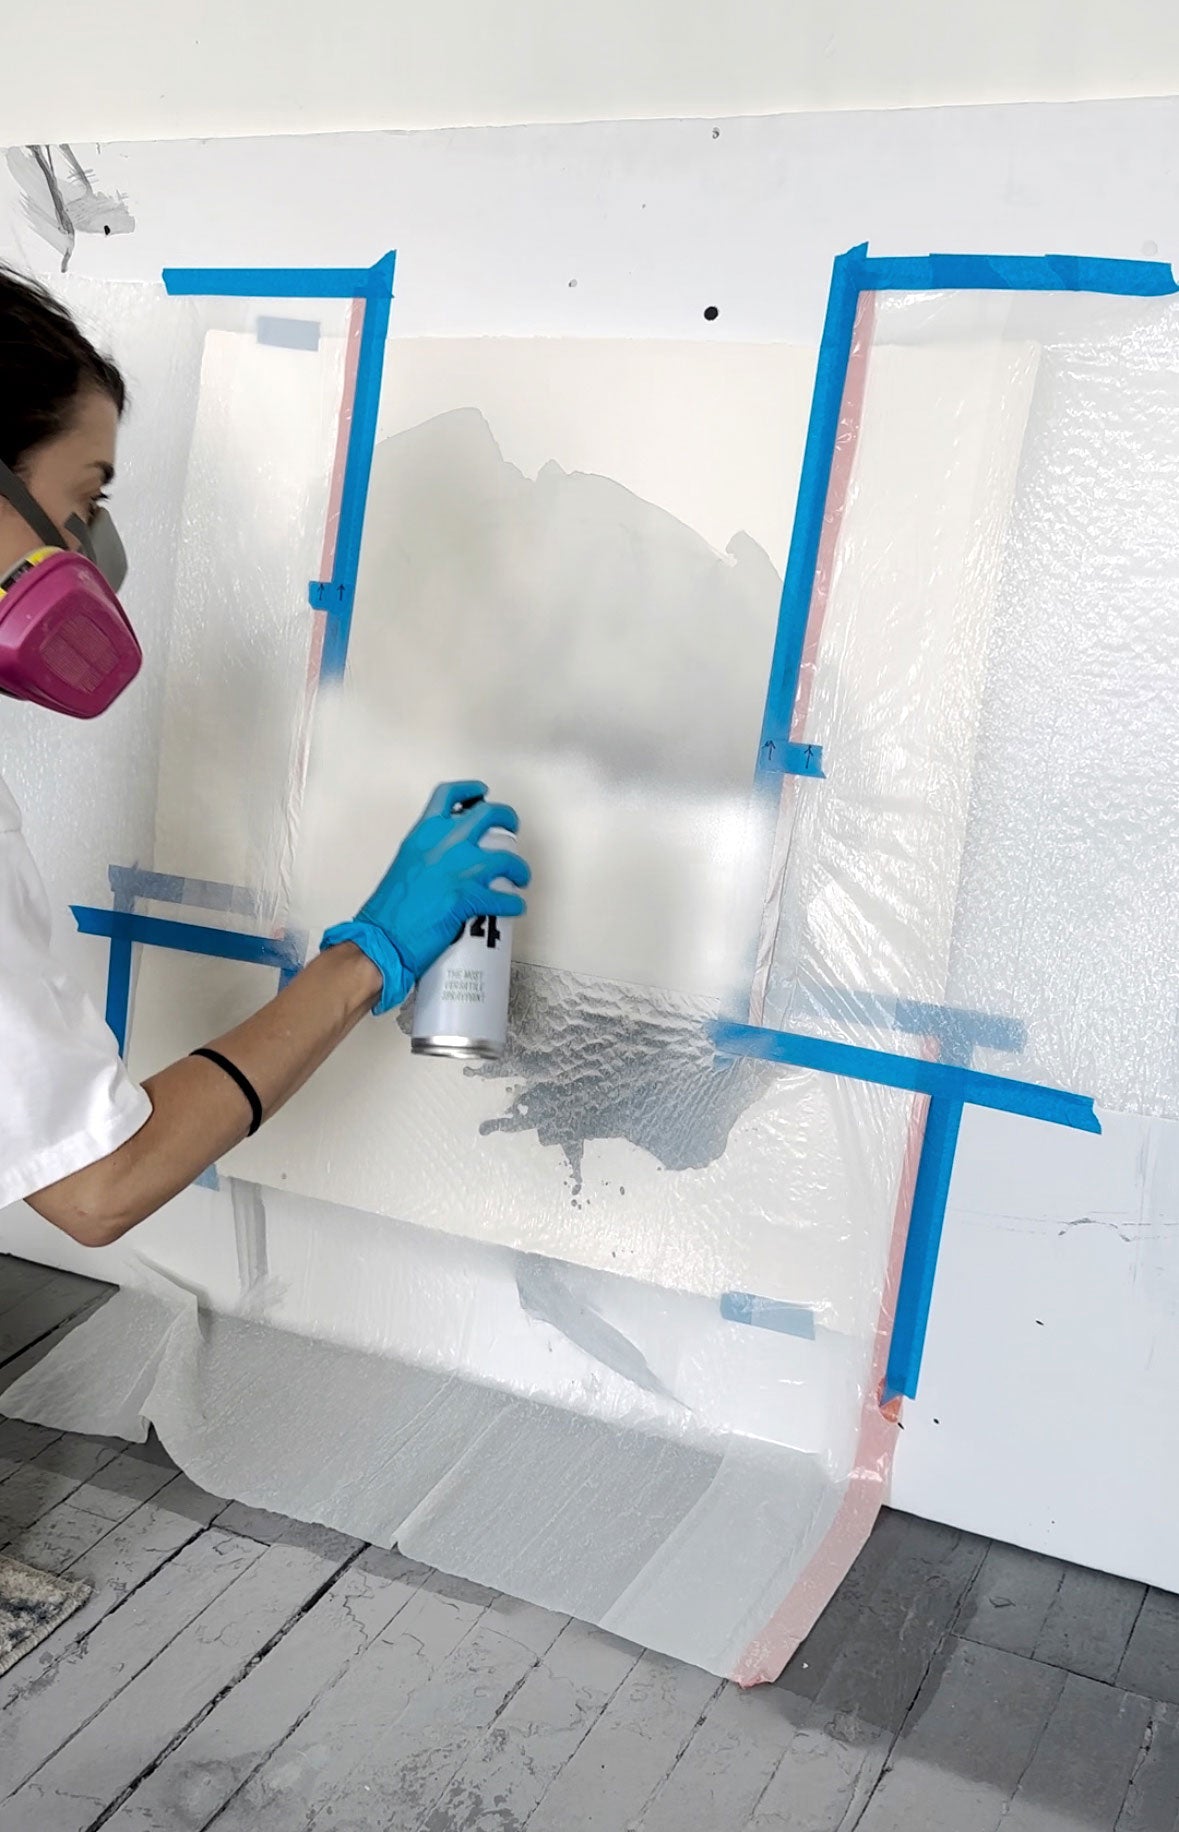 Kim spray painting a layer of white onto a painting